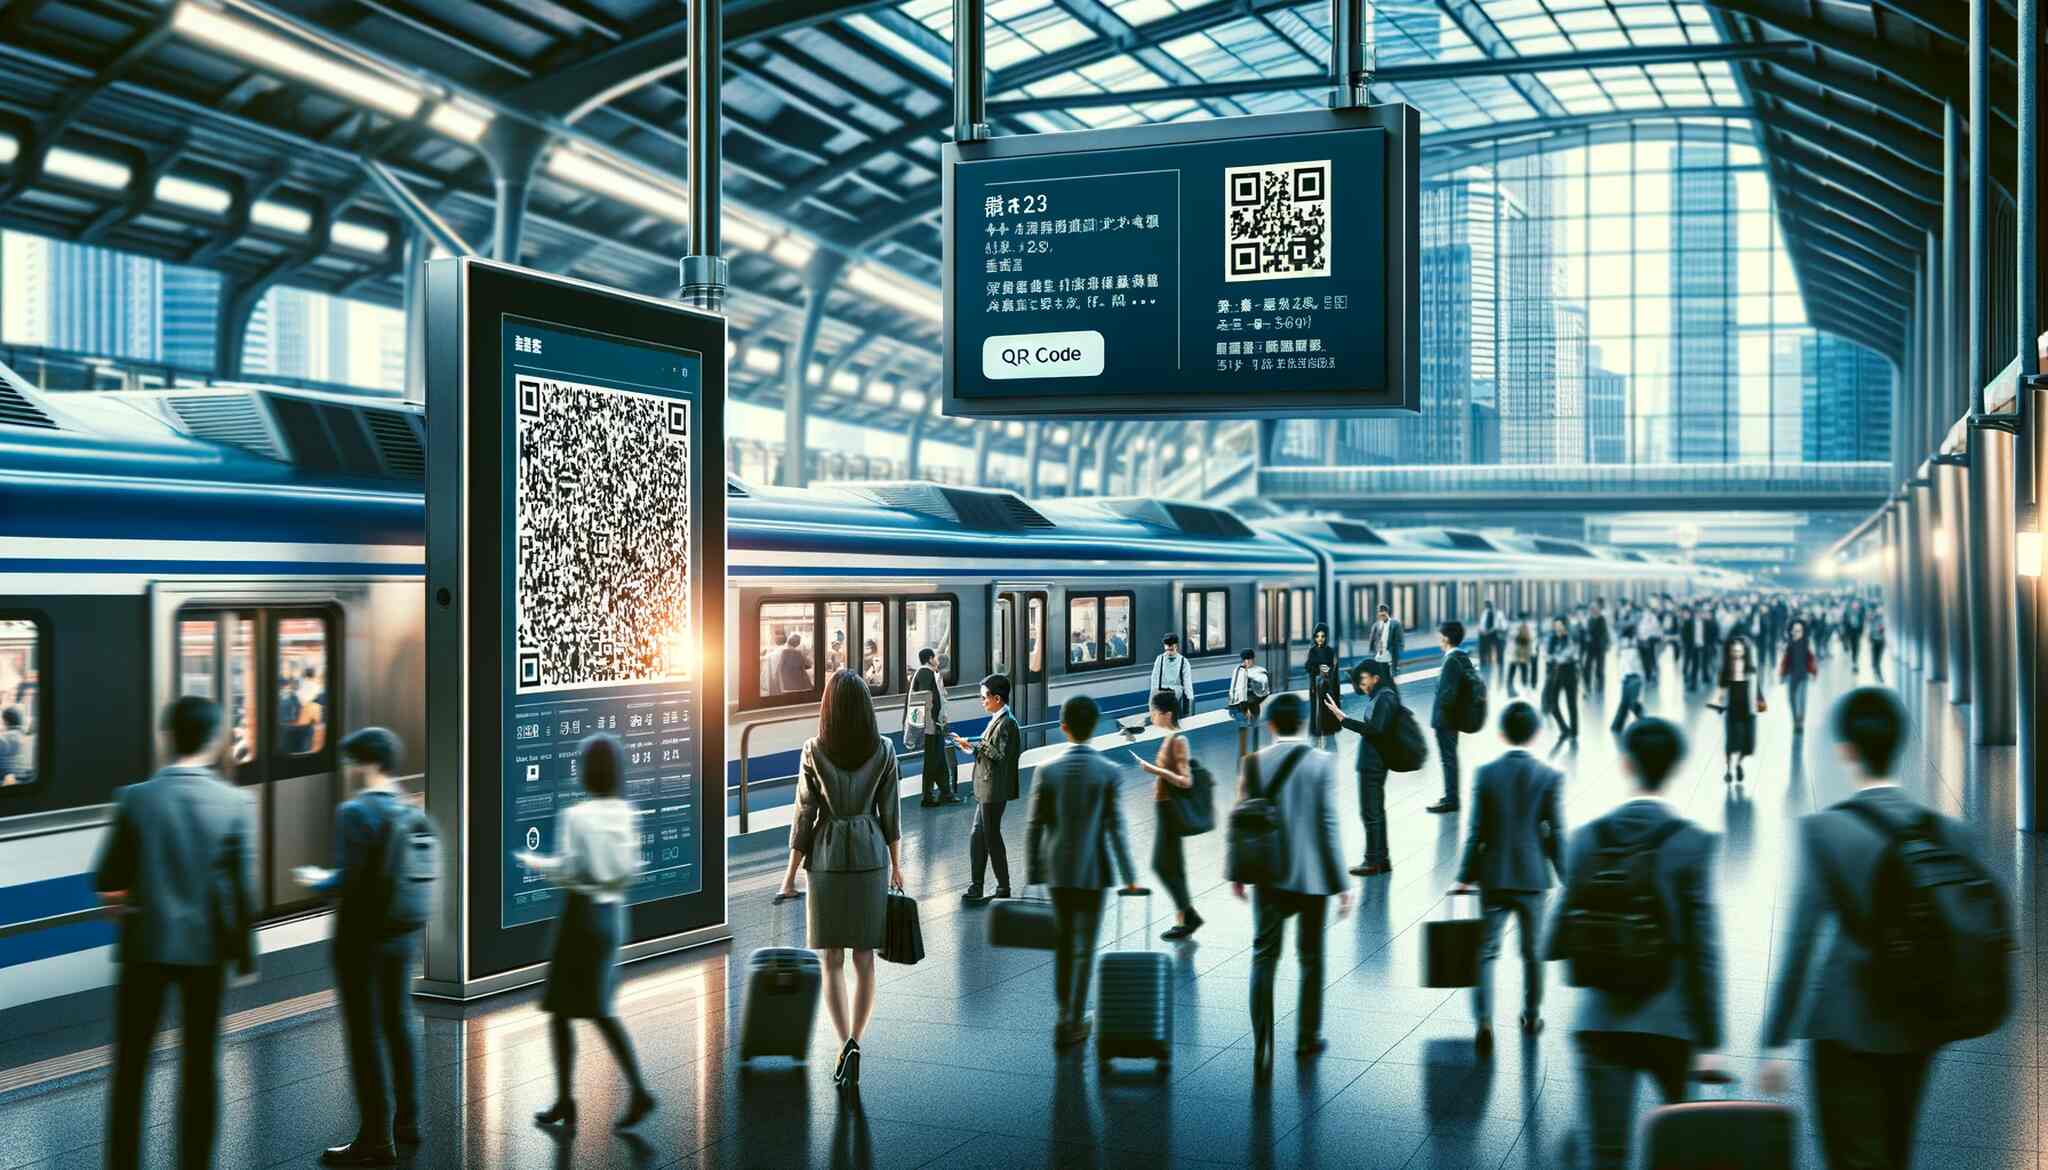 A bustling urban train station during rush hour, with a clear focus on an information board displaying a large QR code